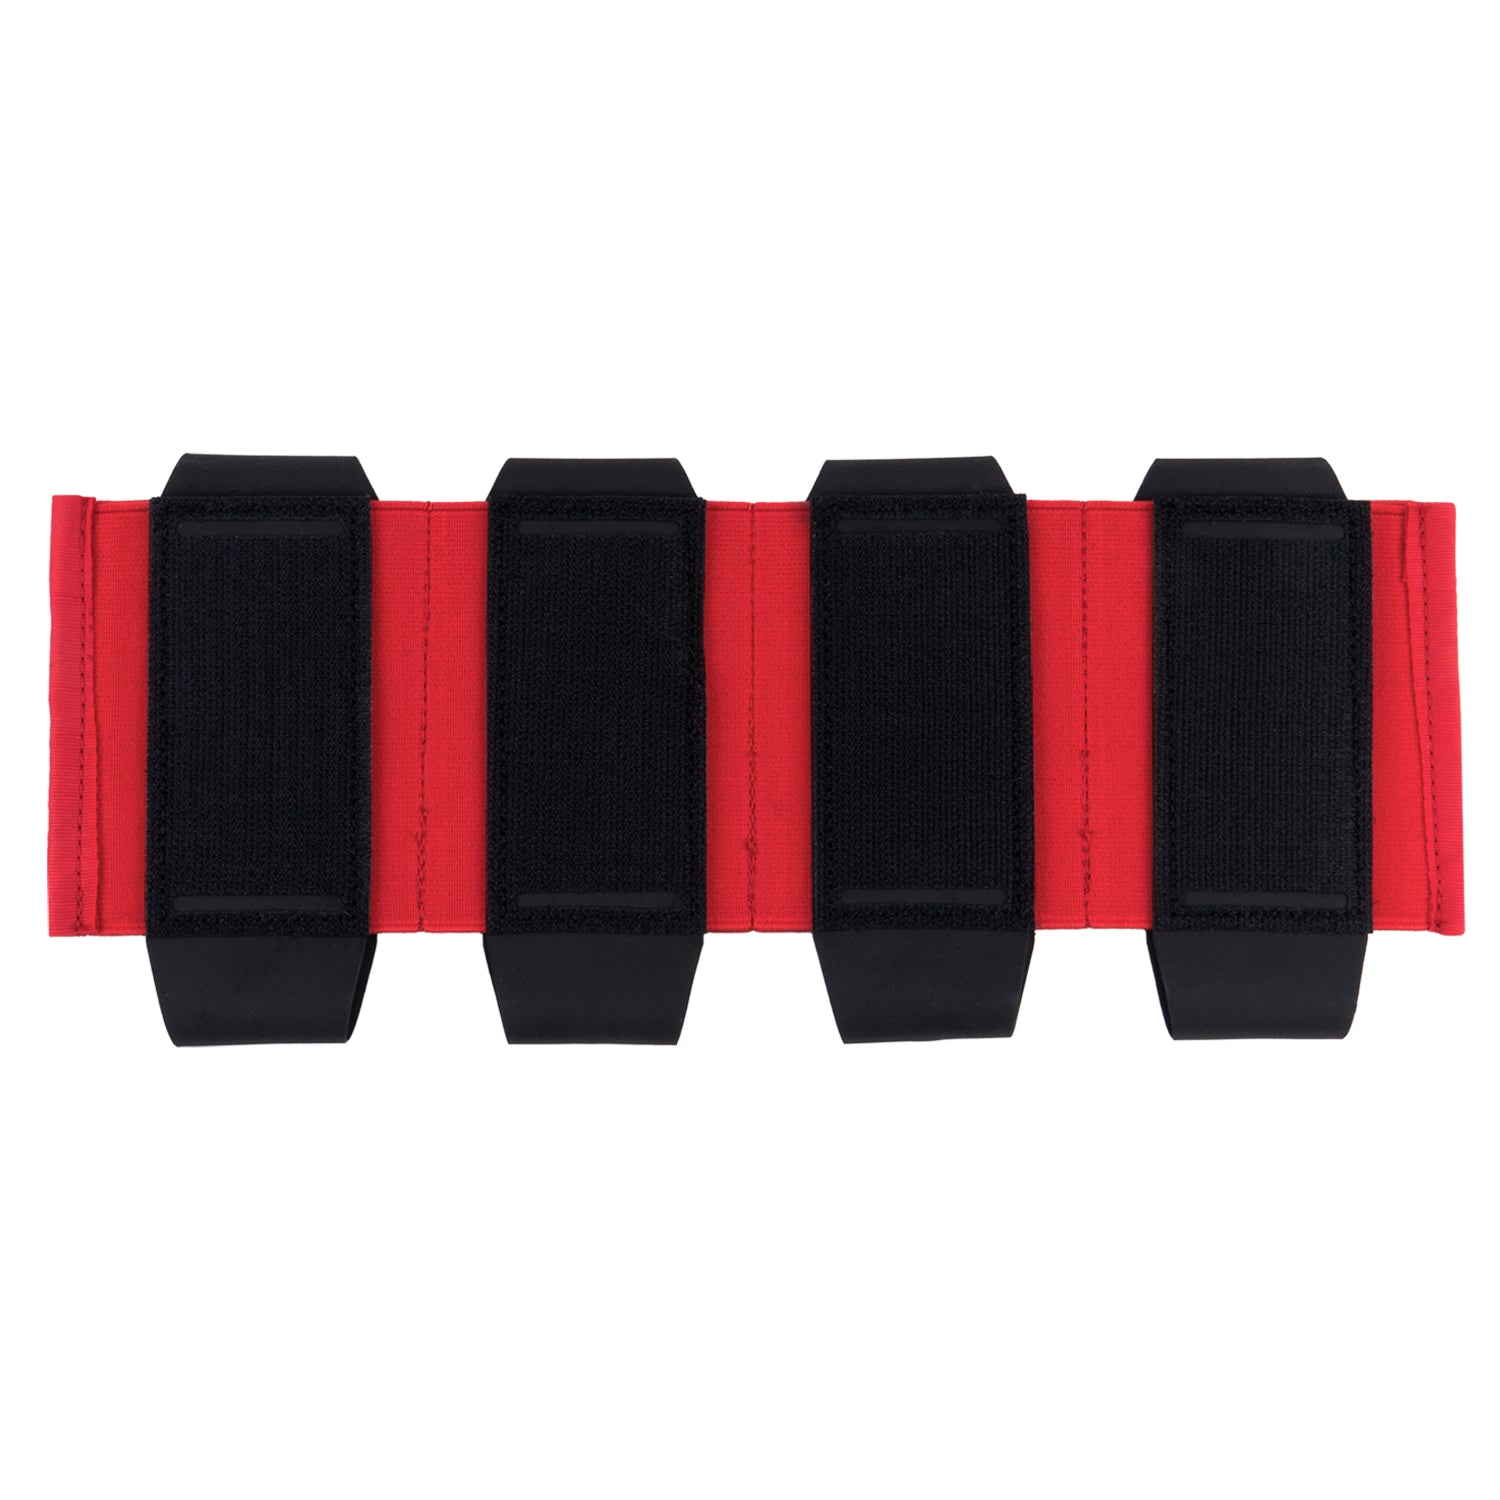 PROTON MAG POUCH INSERT - RIFLE [QUAD] - RED